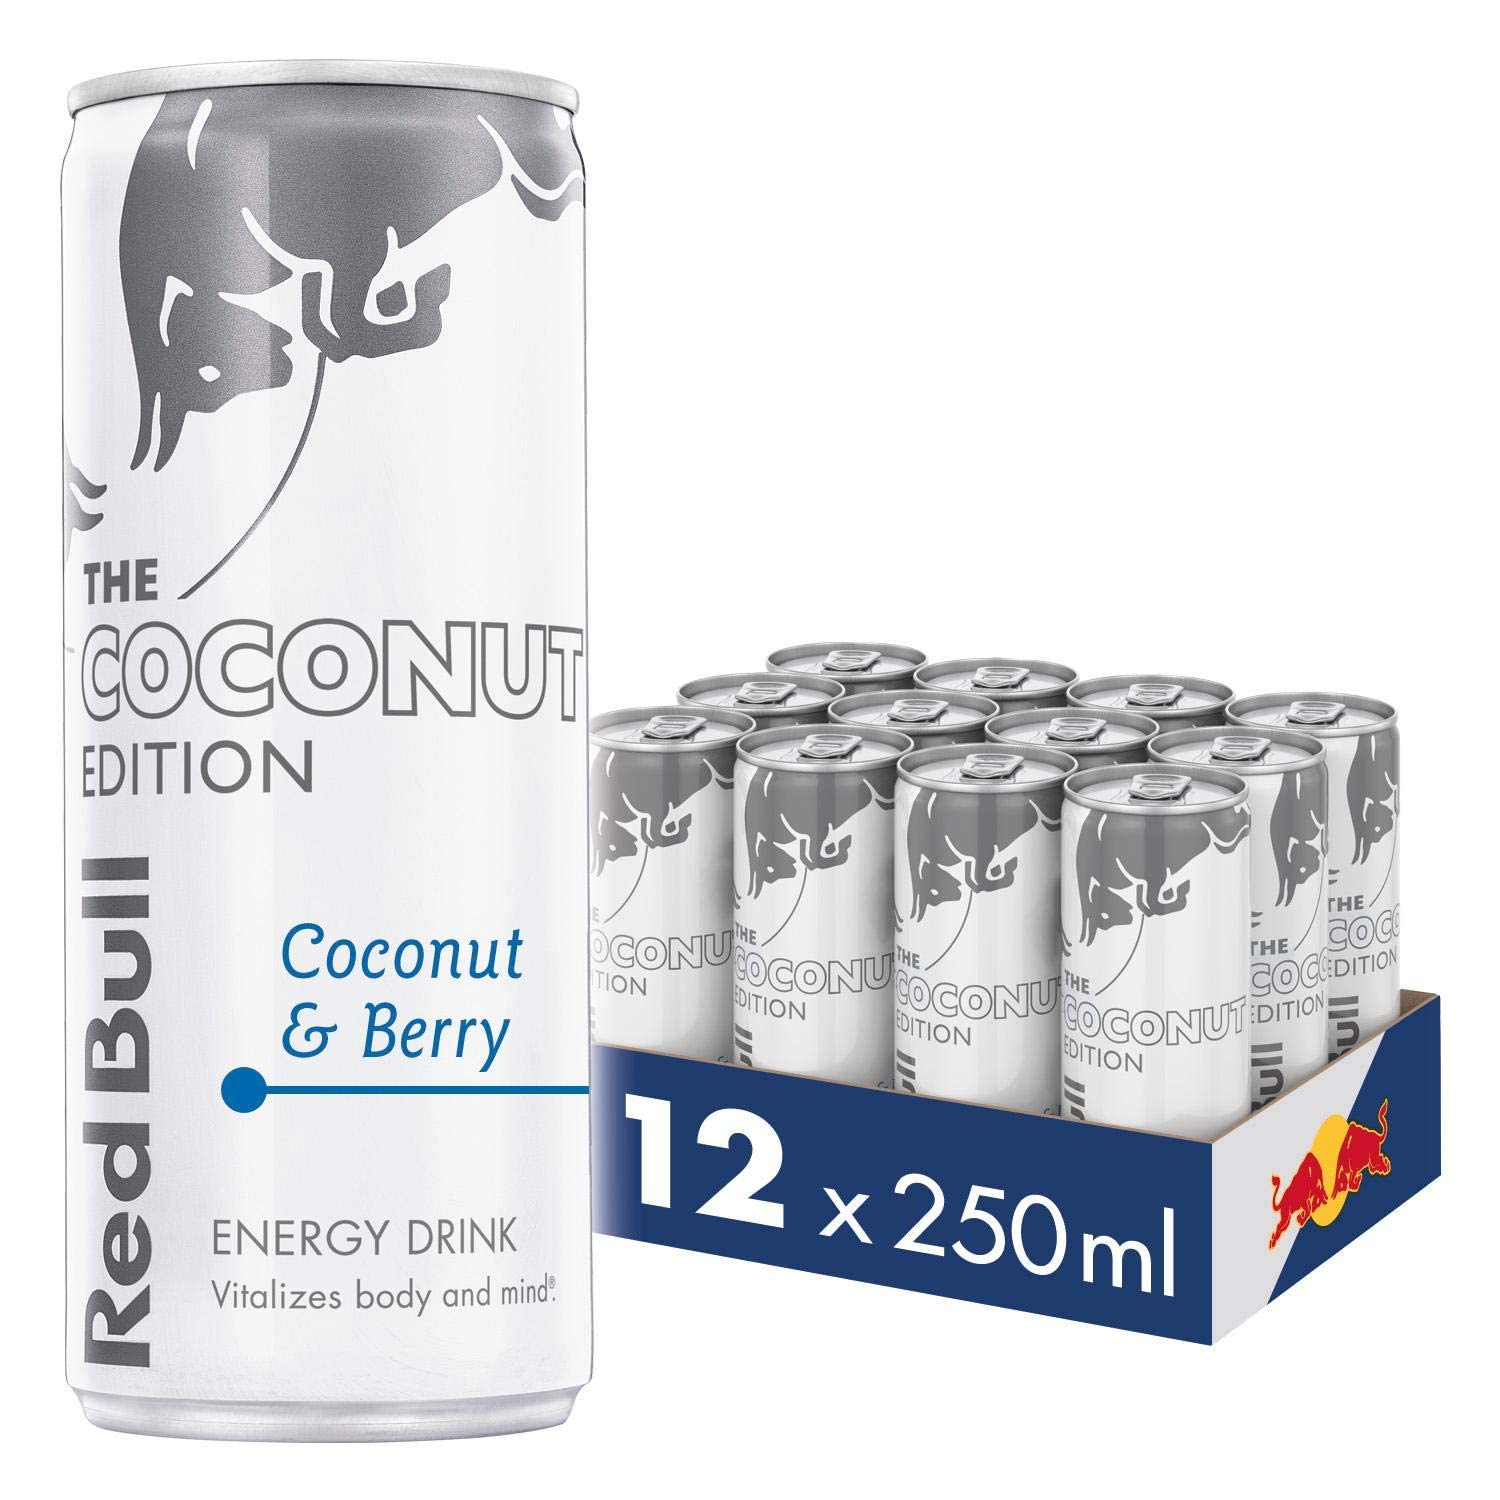 Red Bull Energy Drink Coconut Berry - 250ml - Case of 12